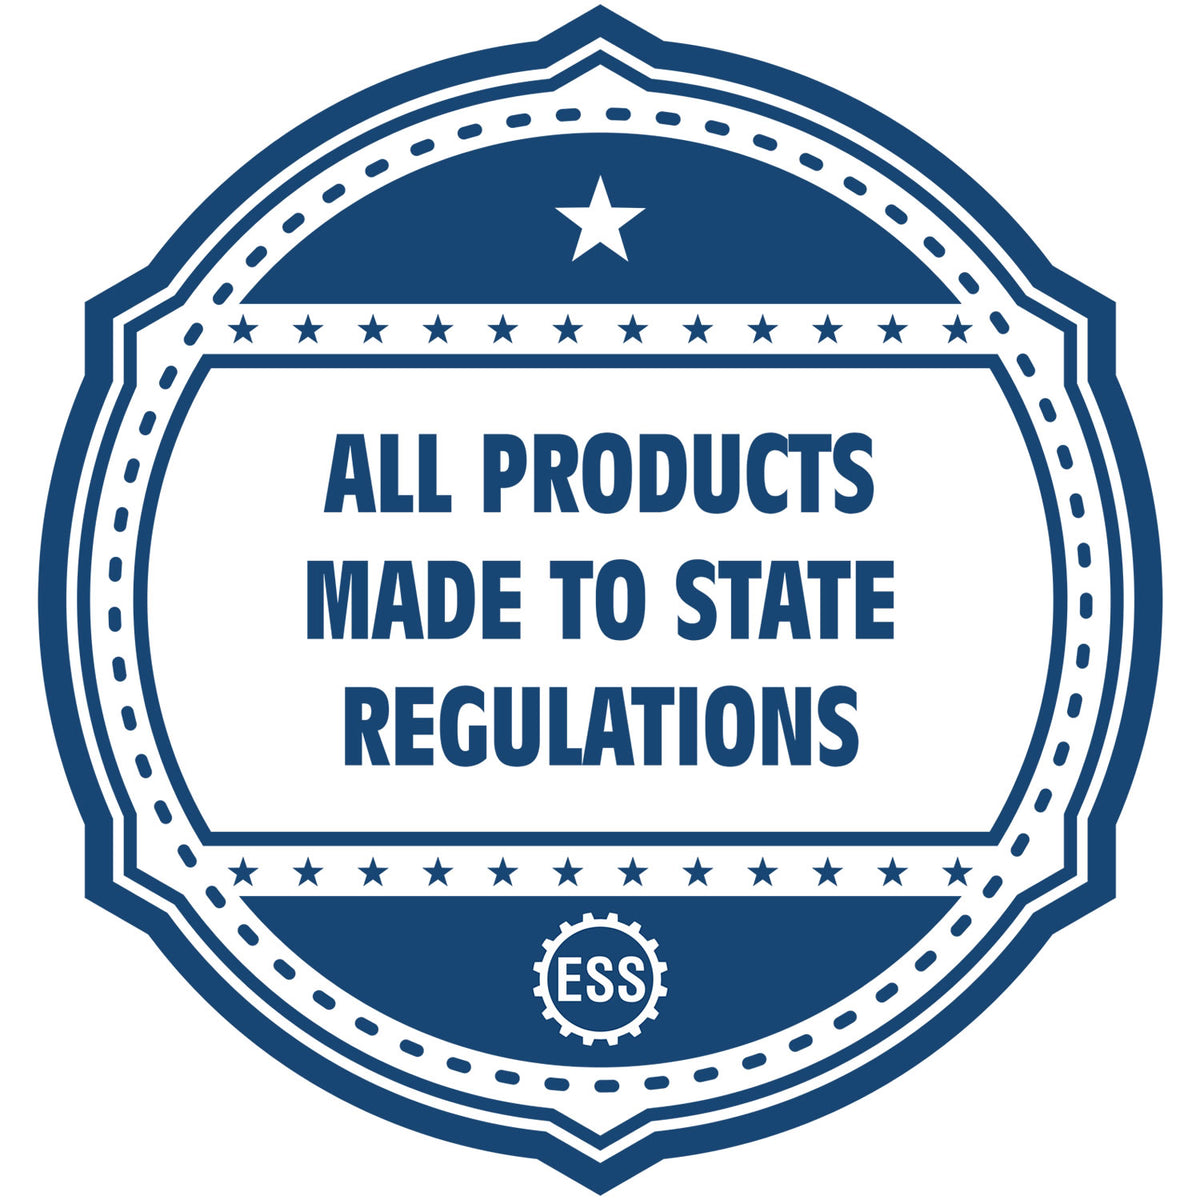 An icon or badge element for the West Virginia Engineer Desk Seal showing that this product is made in compliance with state regulations.